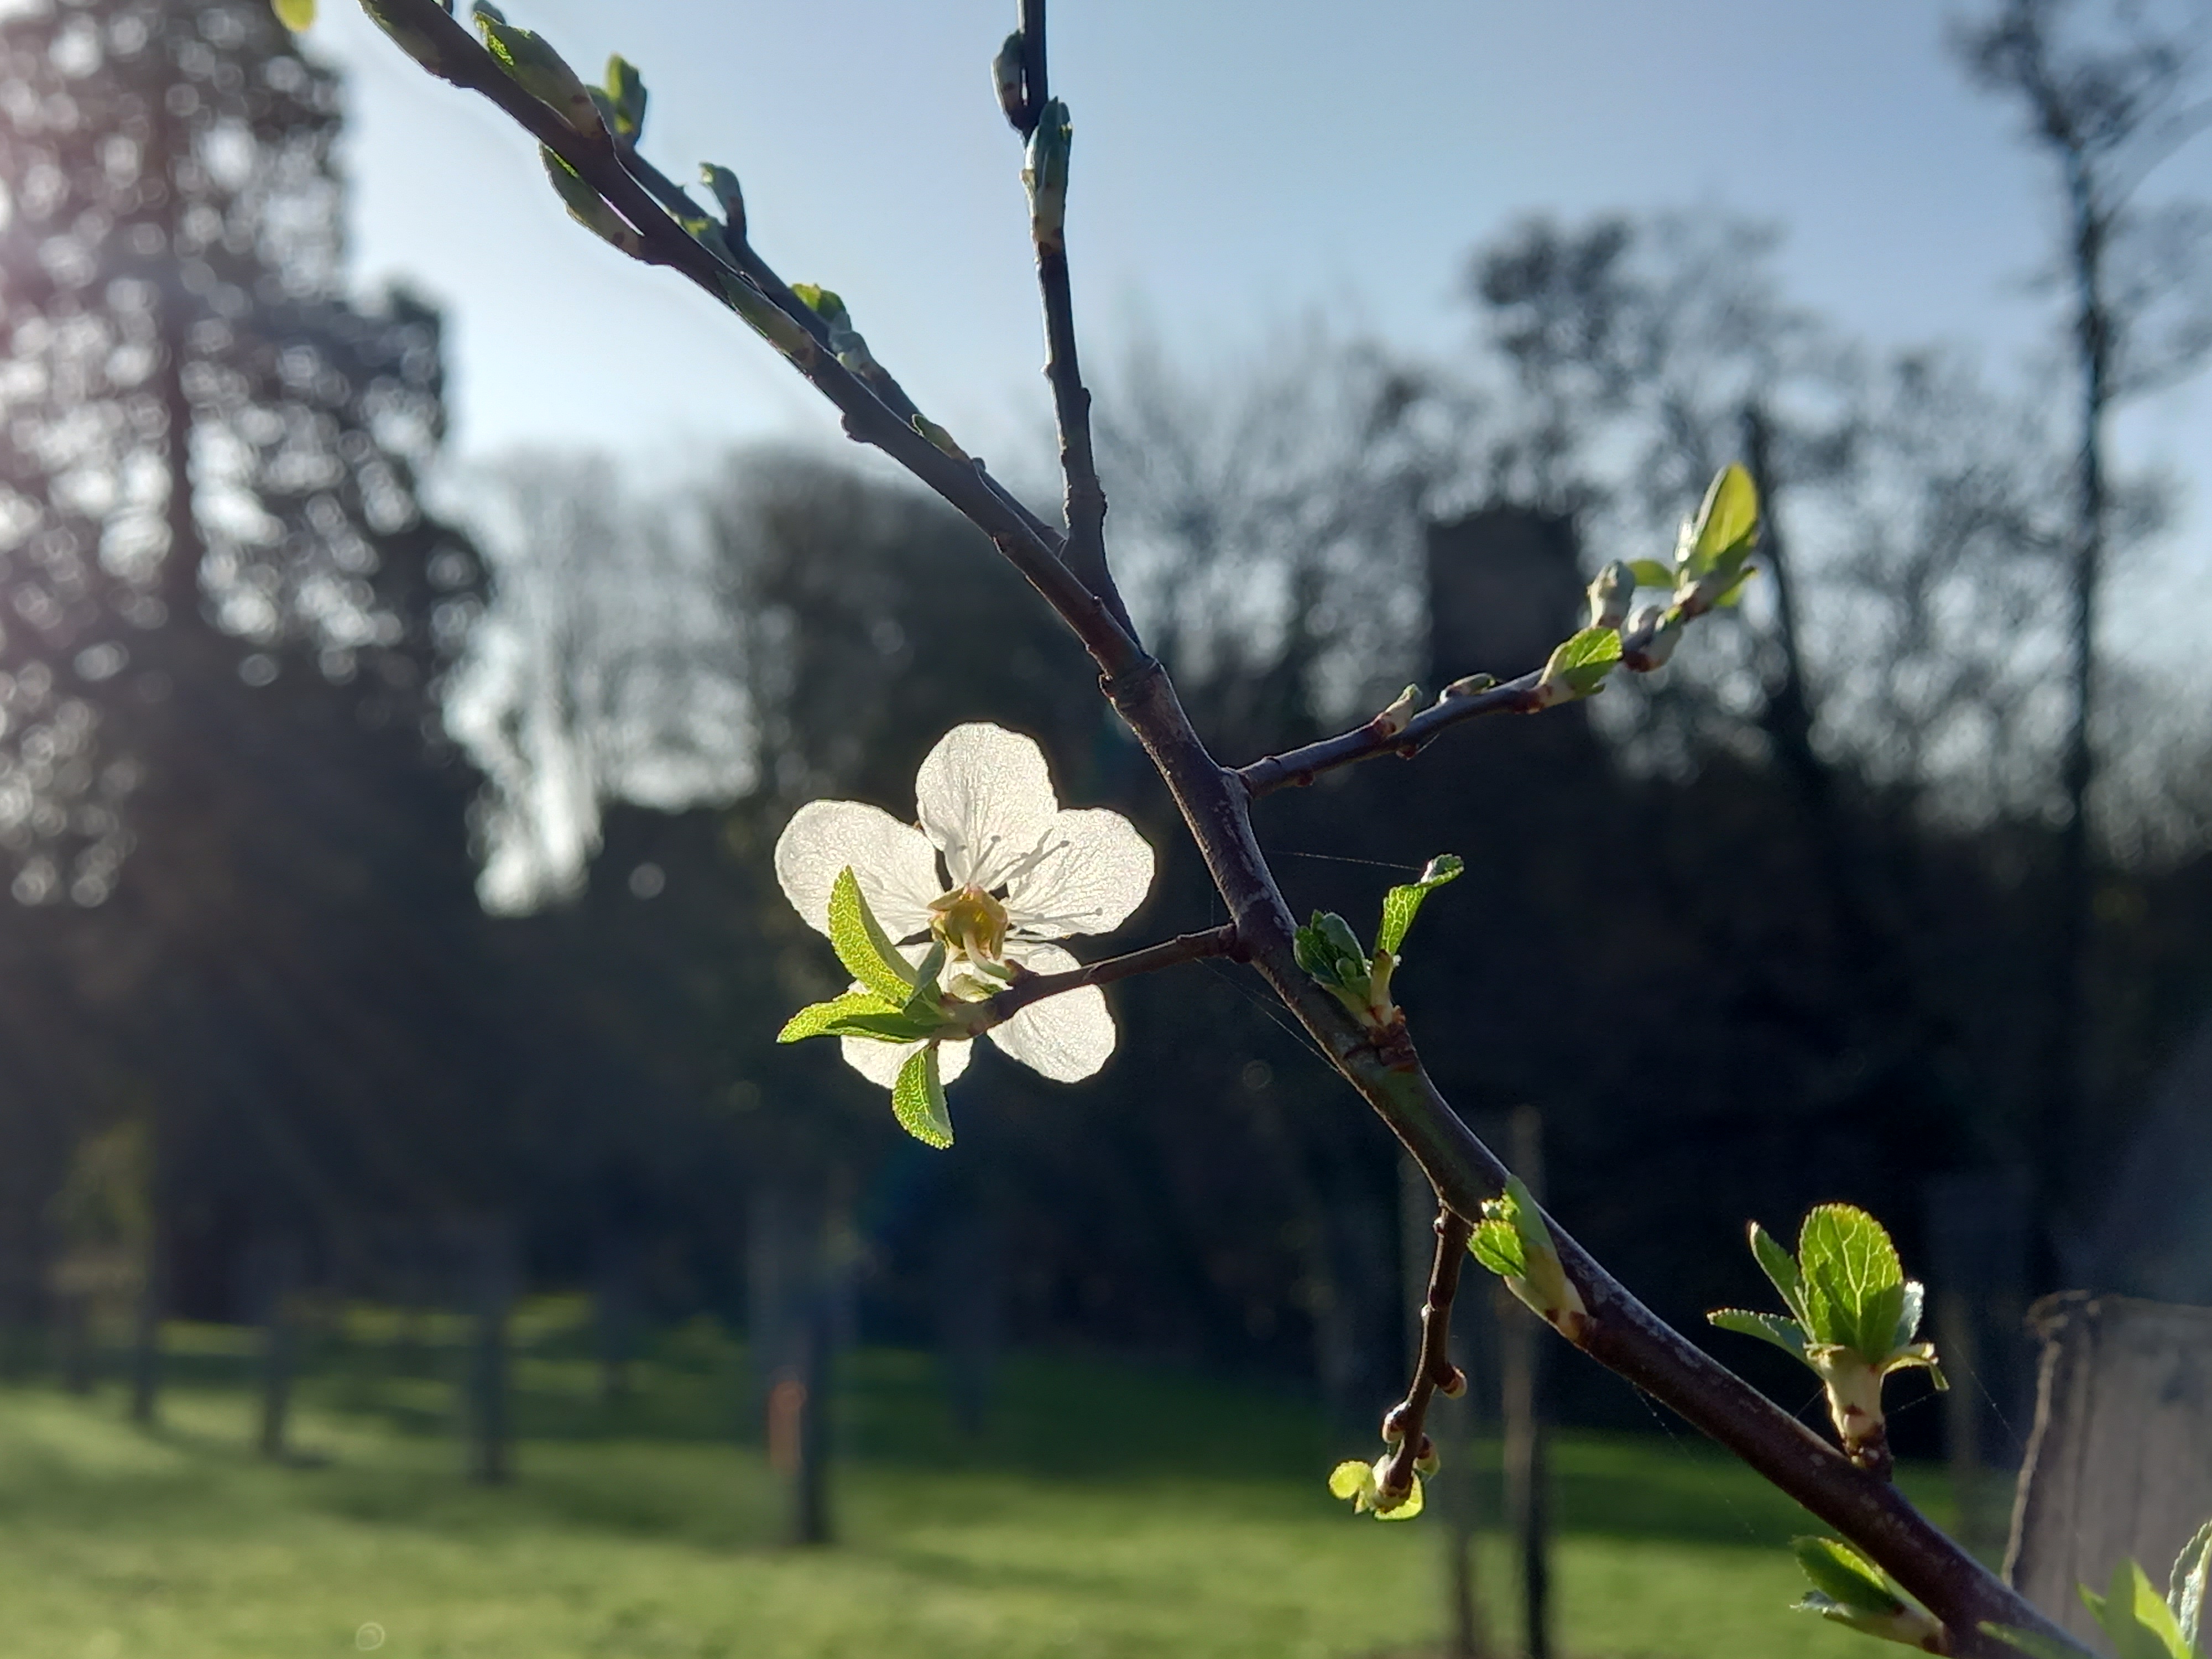 Blossom on one of the fruit trees.